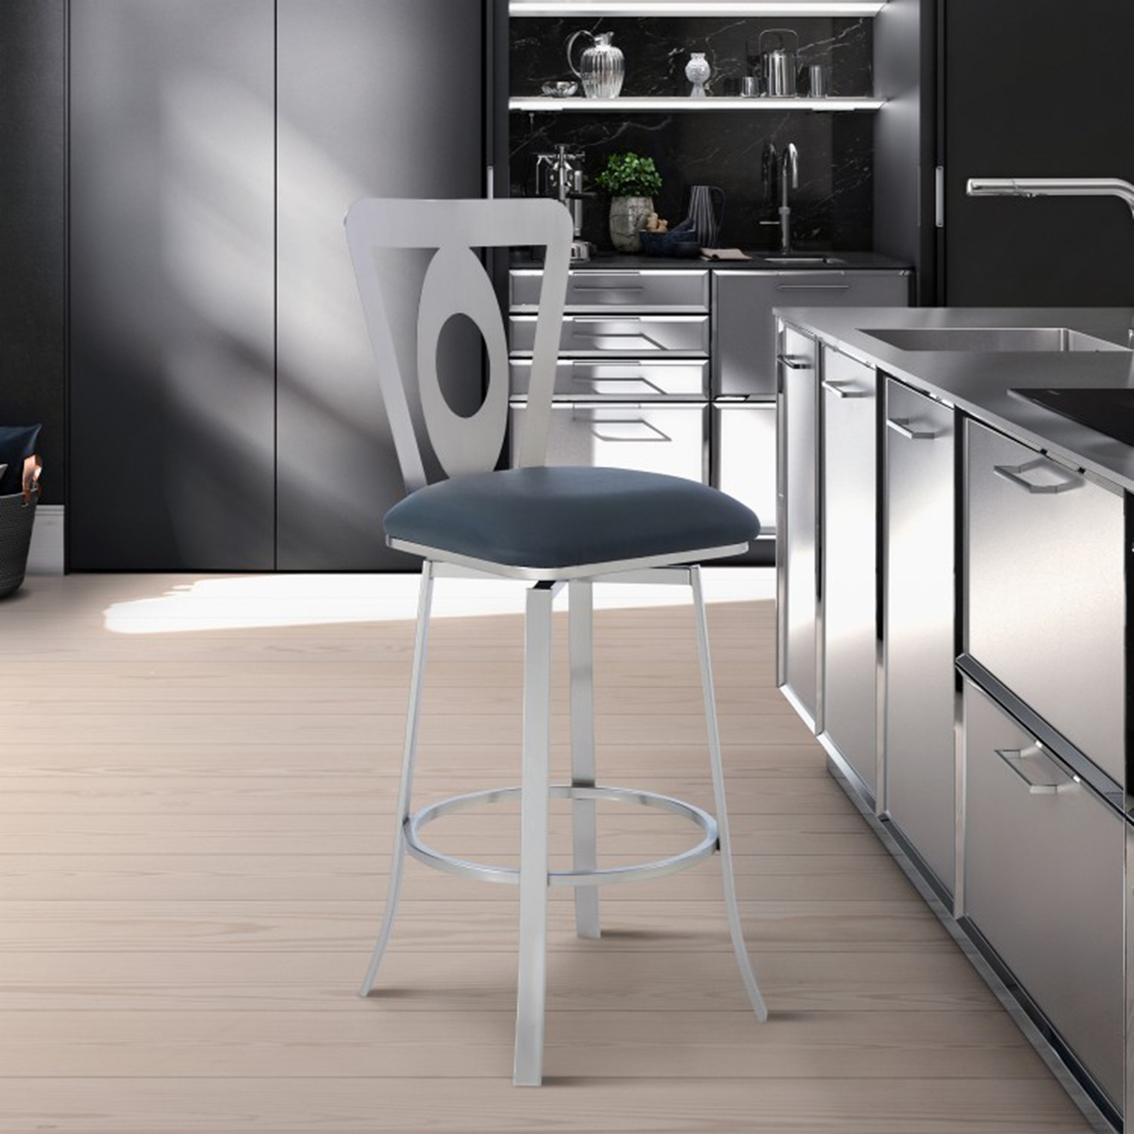 Armen Living Lola Barstool in Brushed Stainless Steel Finish and Grey Faux Leather - Image 7 of 7